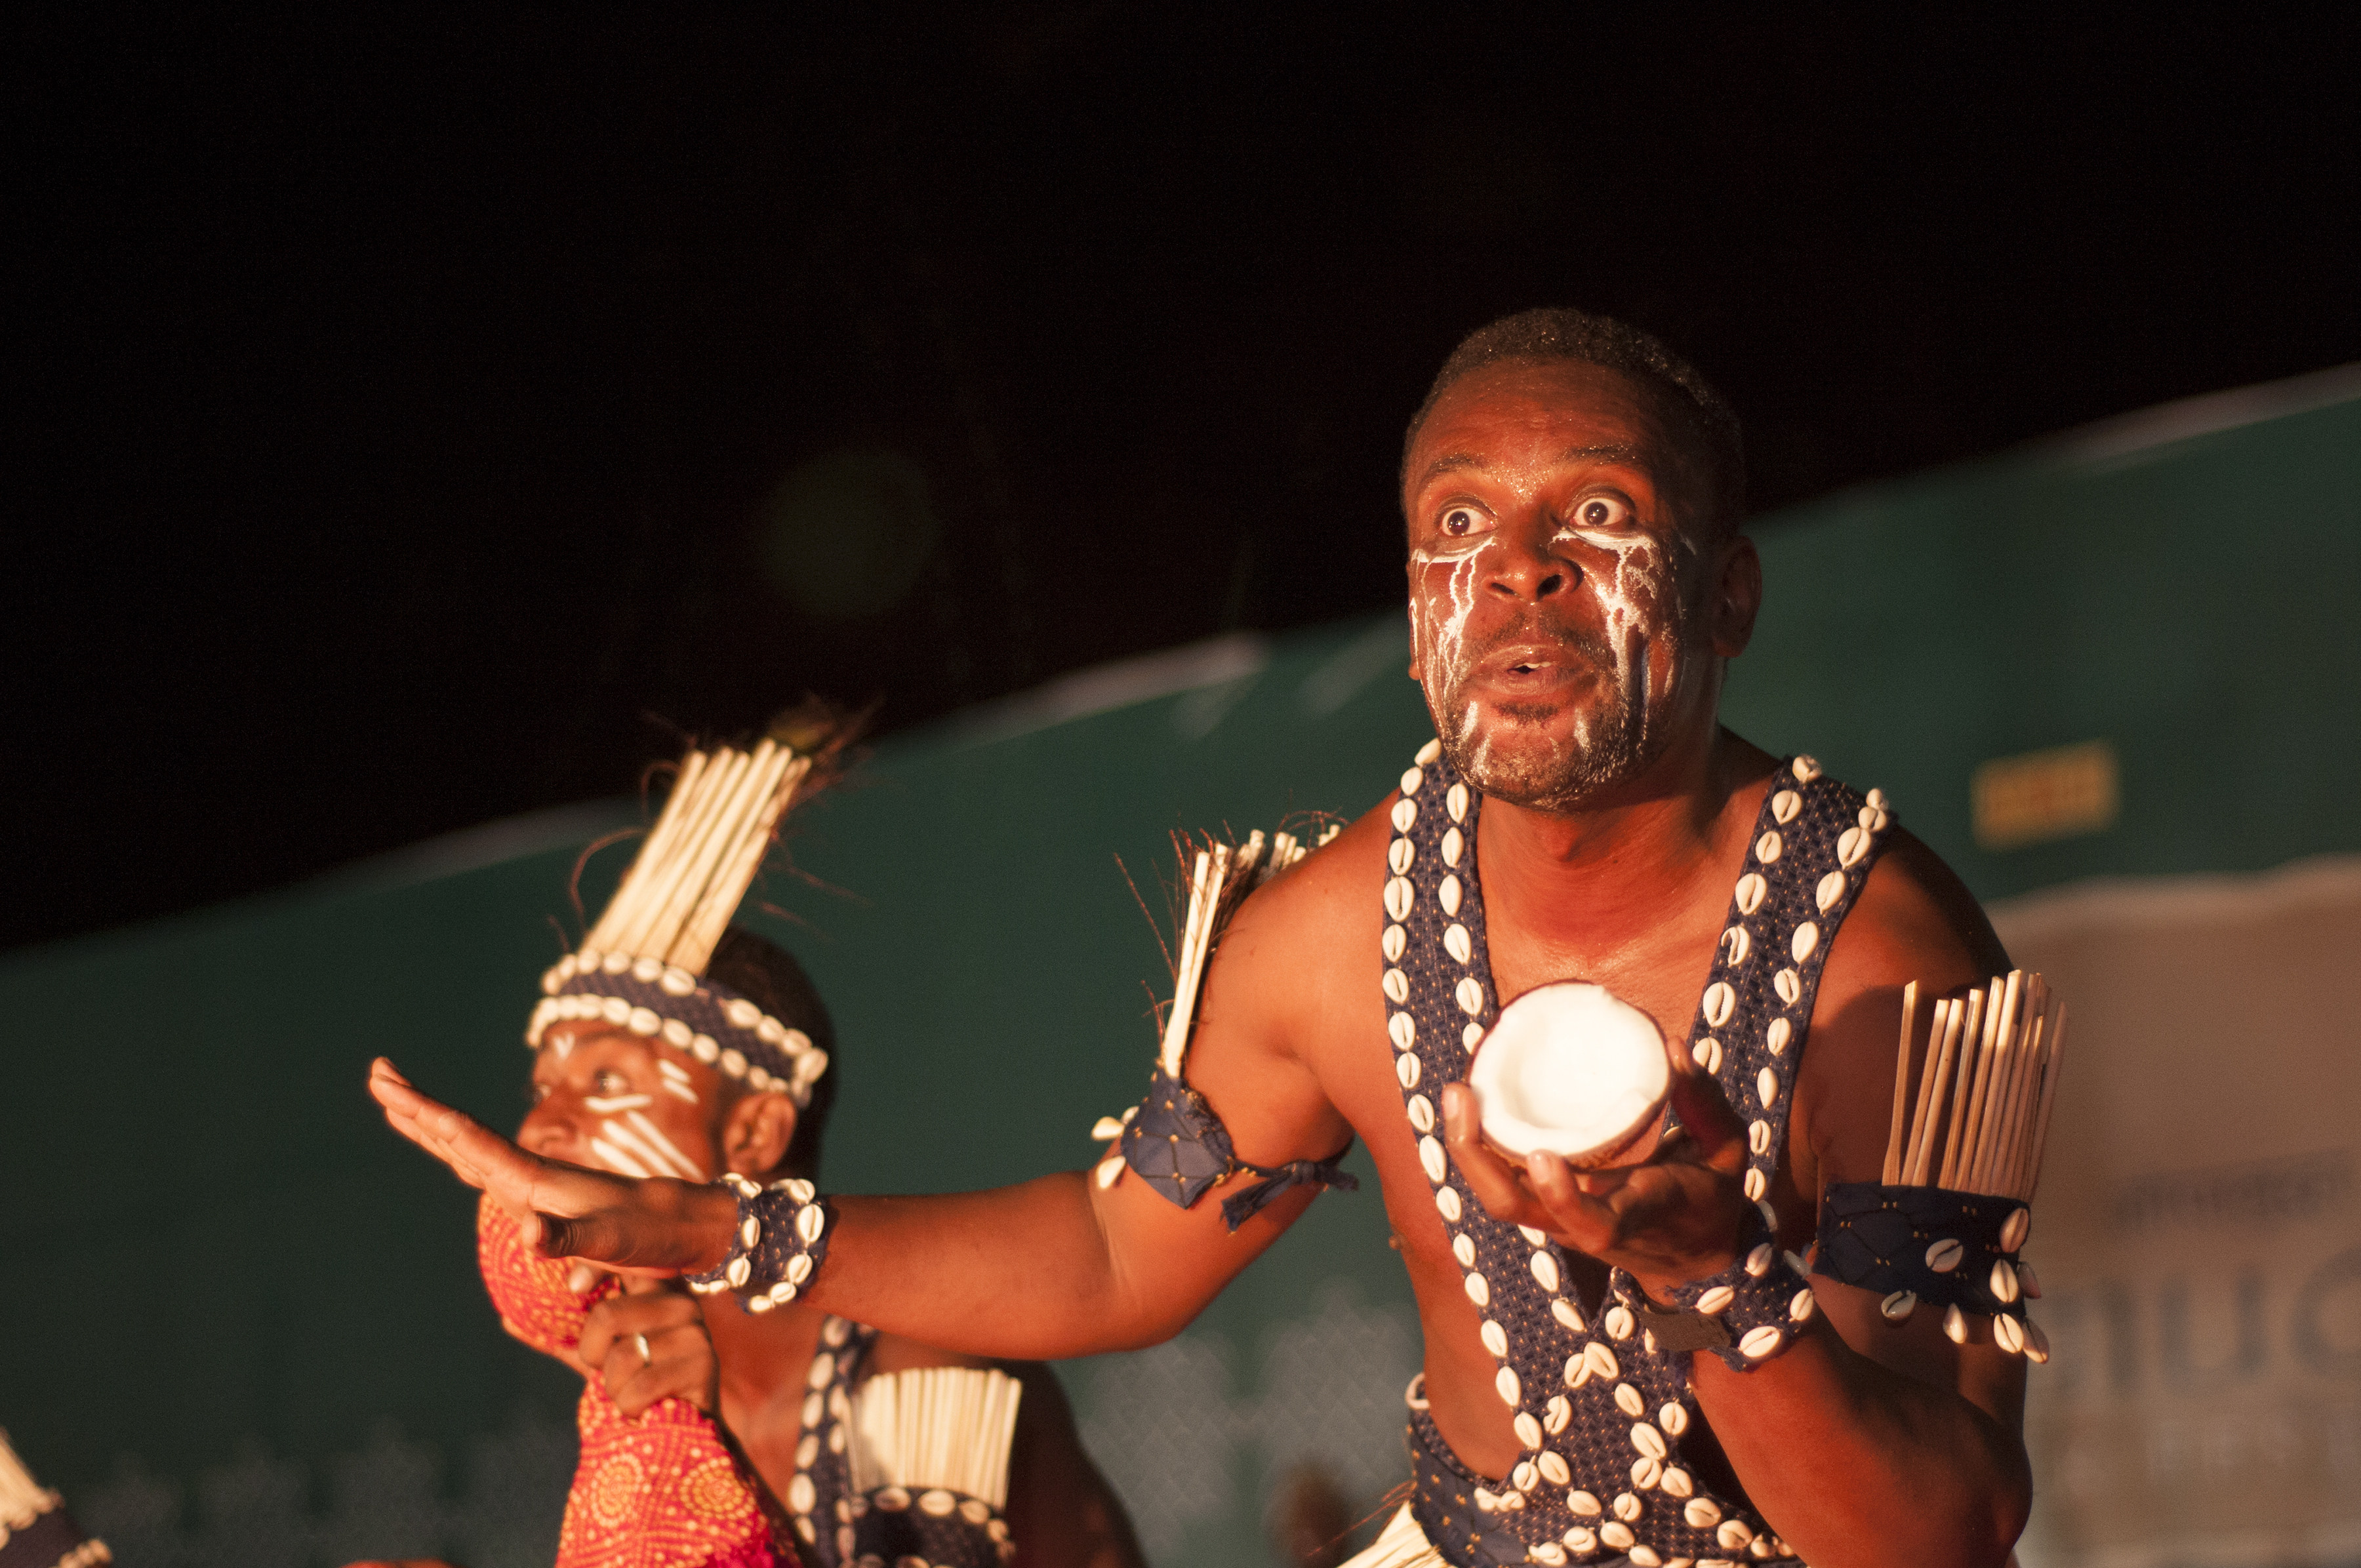 A Siddi man performs in a traditional festival. Siddis came to India from Africa centuries ago. Photo: Shutterstock